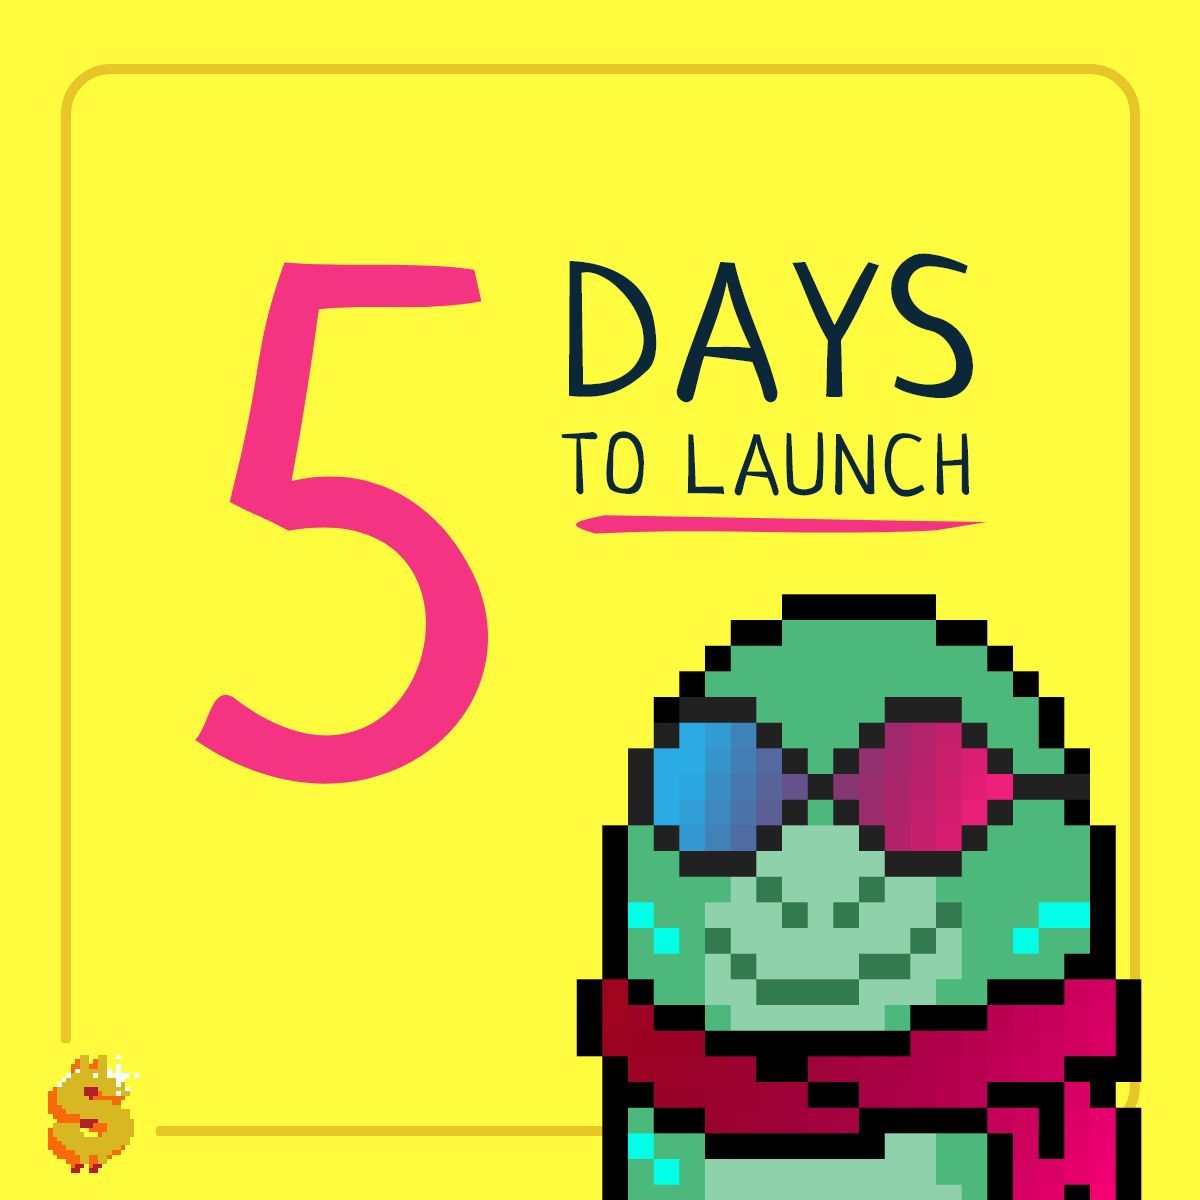 Daily reminder: The launch party is happening April 3-4th!

5 days to go!

Be part of the HODLer's, join the daily HODL NFT auctions to be a co-owner!

Built on $ICP

#CommunityOwned #ICP #InternetComputer